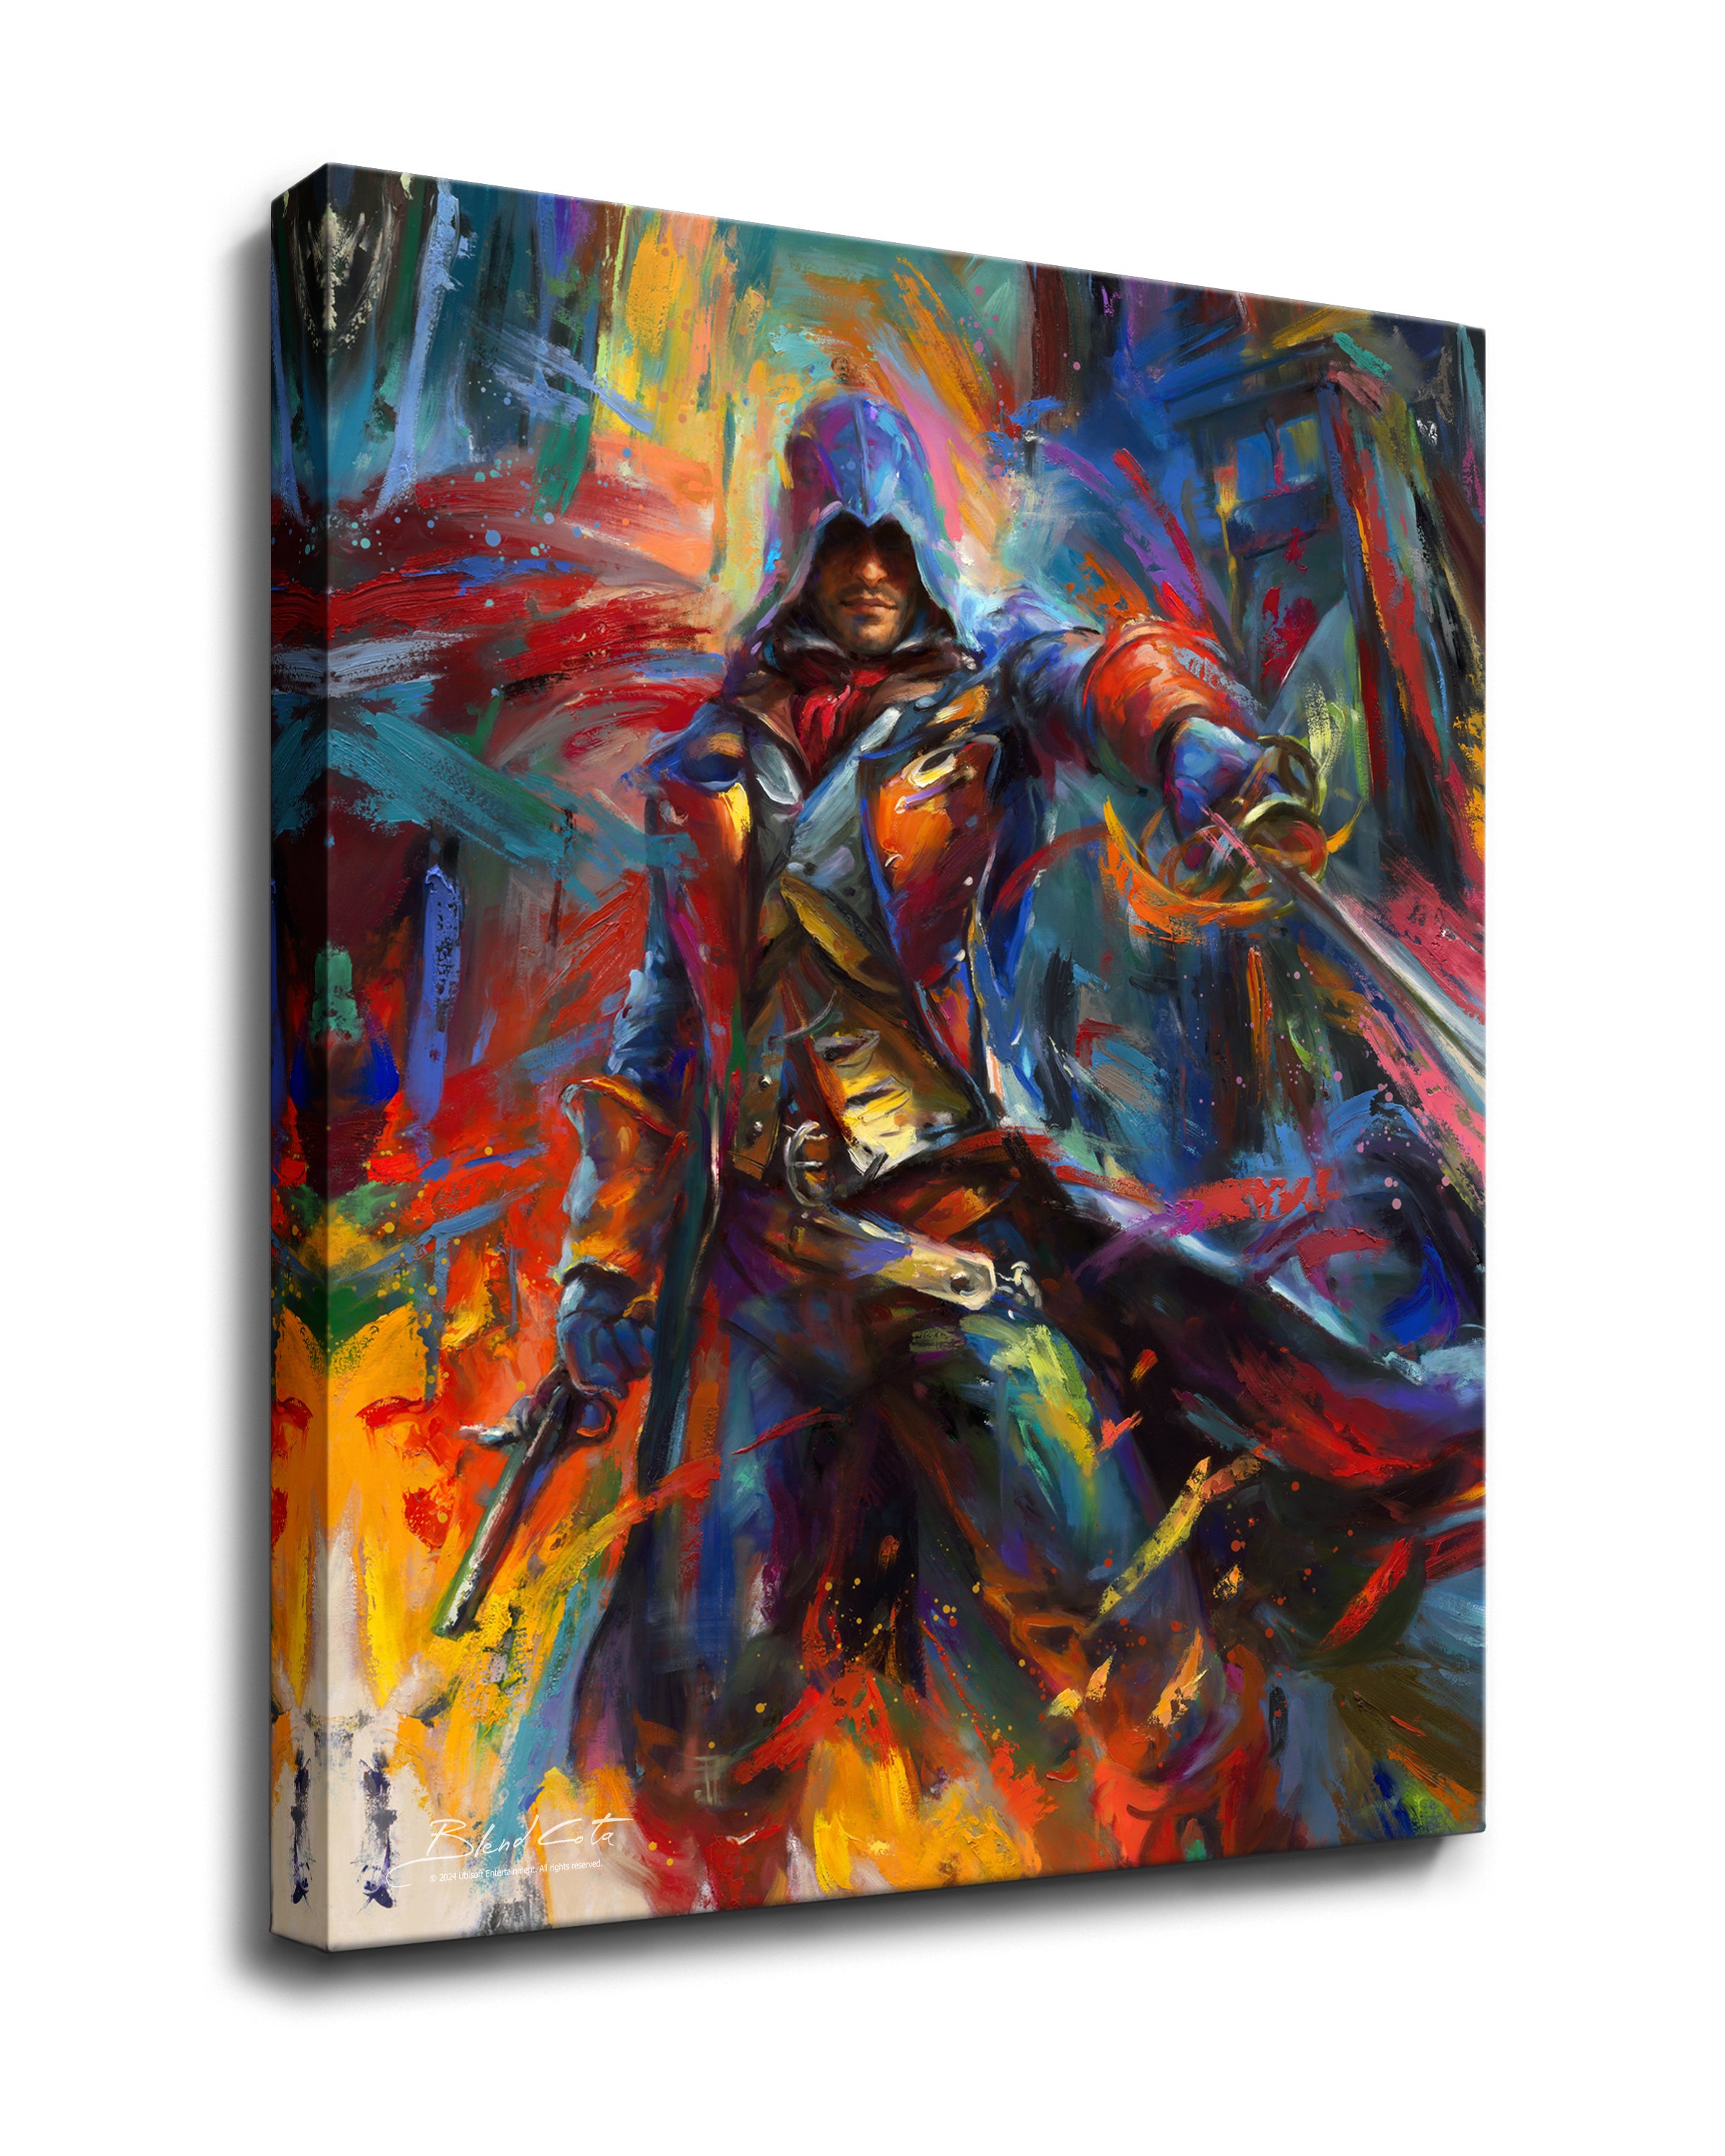 
                  
                    Gallery wrapped canvas print of Assassin's Creed Arno Dorian of Unity bursting forth with energy and painted with colorful brushstrokes in an expressionistic style.
                  
                